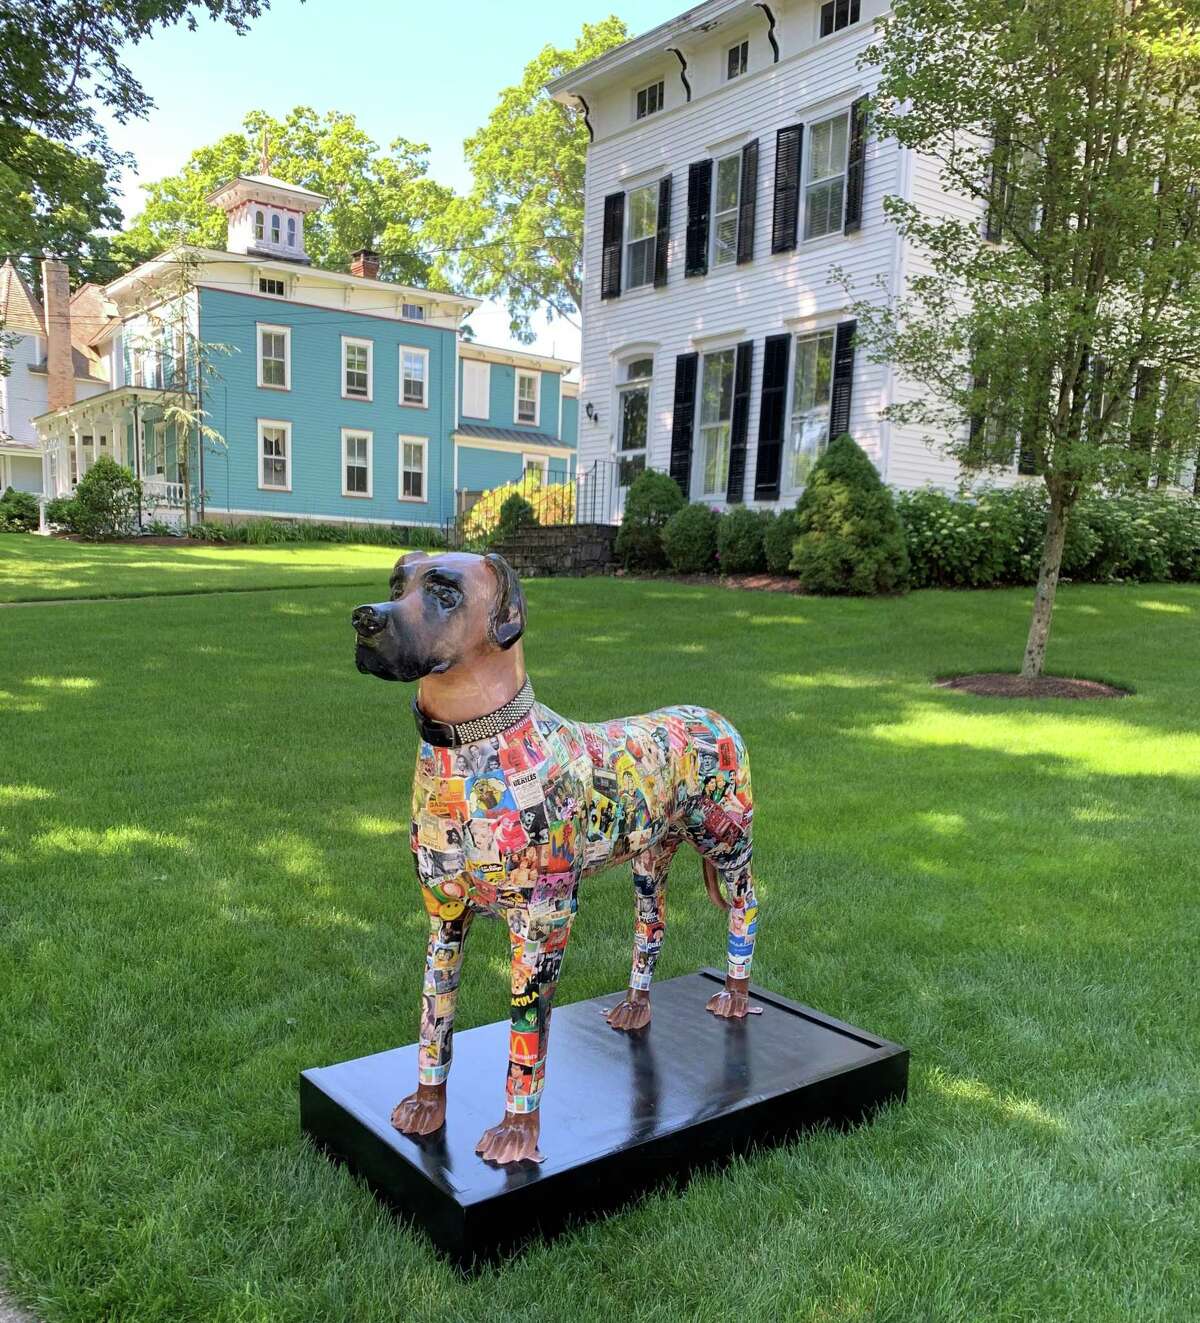 Dog statues are on display up and down Ridgefield as part of a community-wide fundraiser coordinated by the Artful Visual Arts Initiative non-profit.